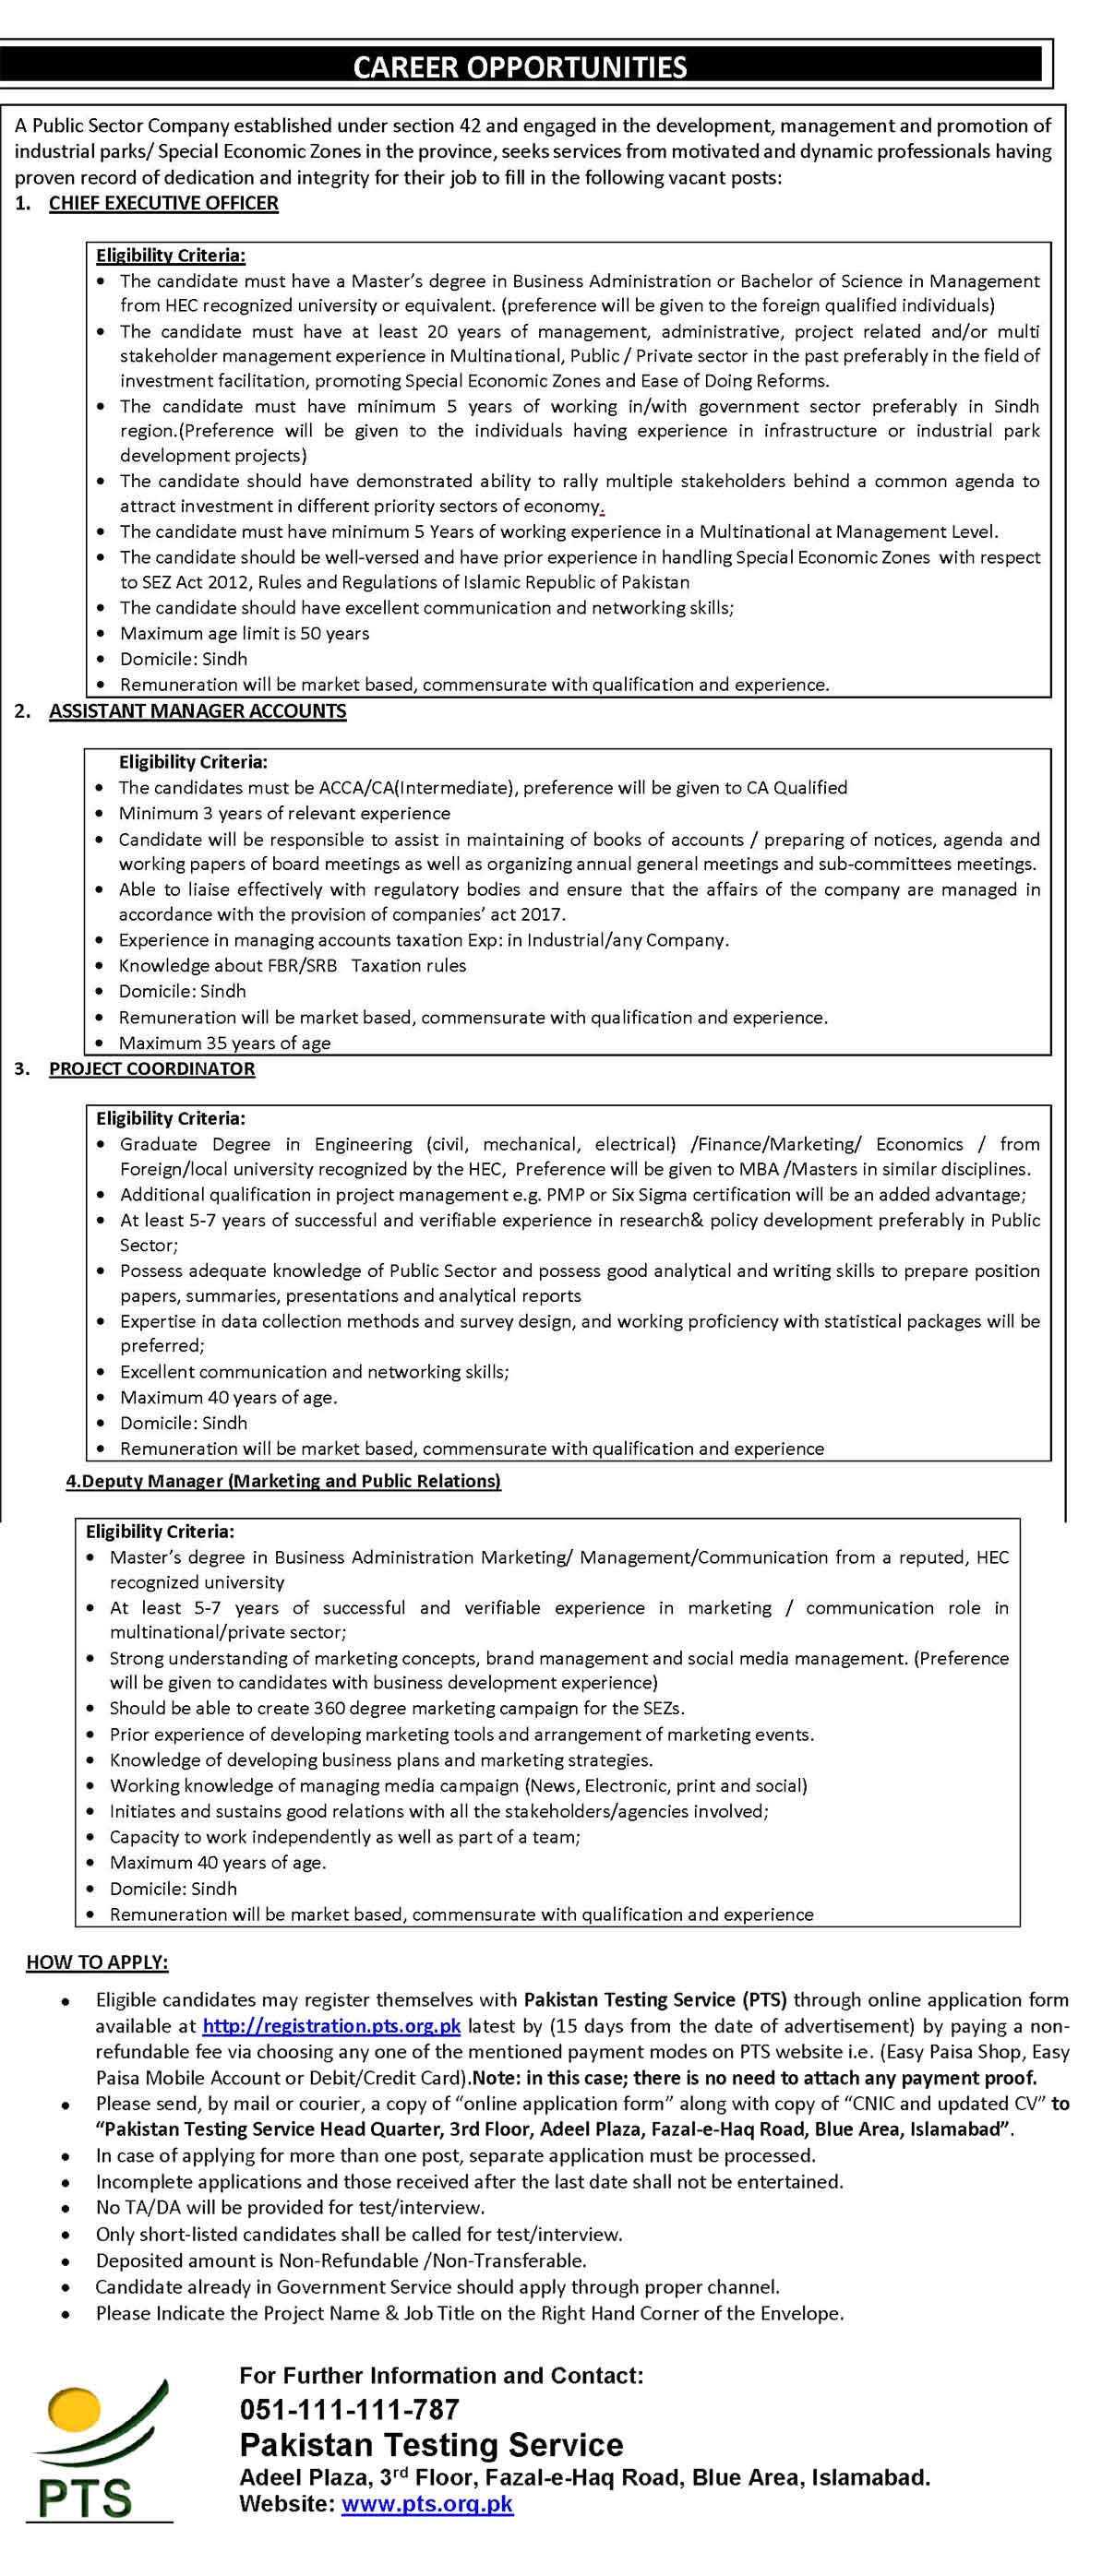 Public Sector Company Govt of Sindh Jobs